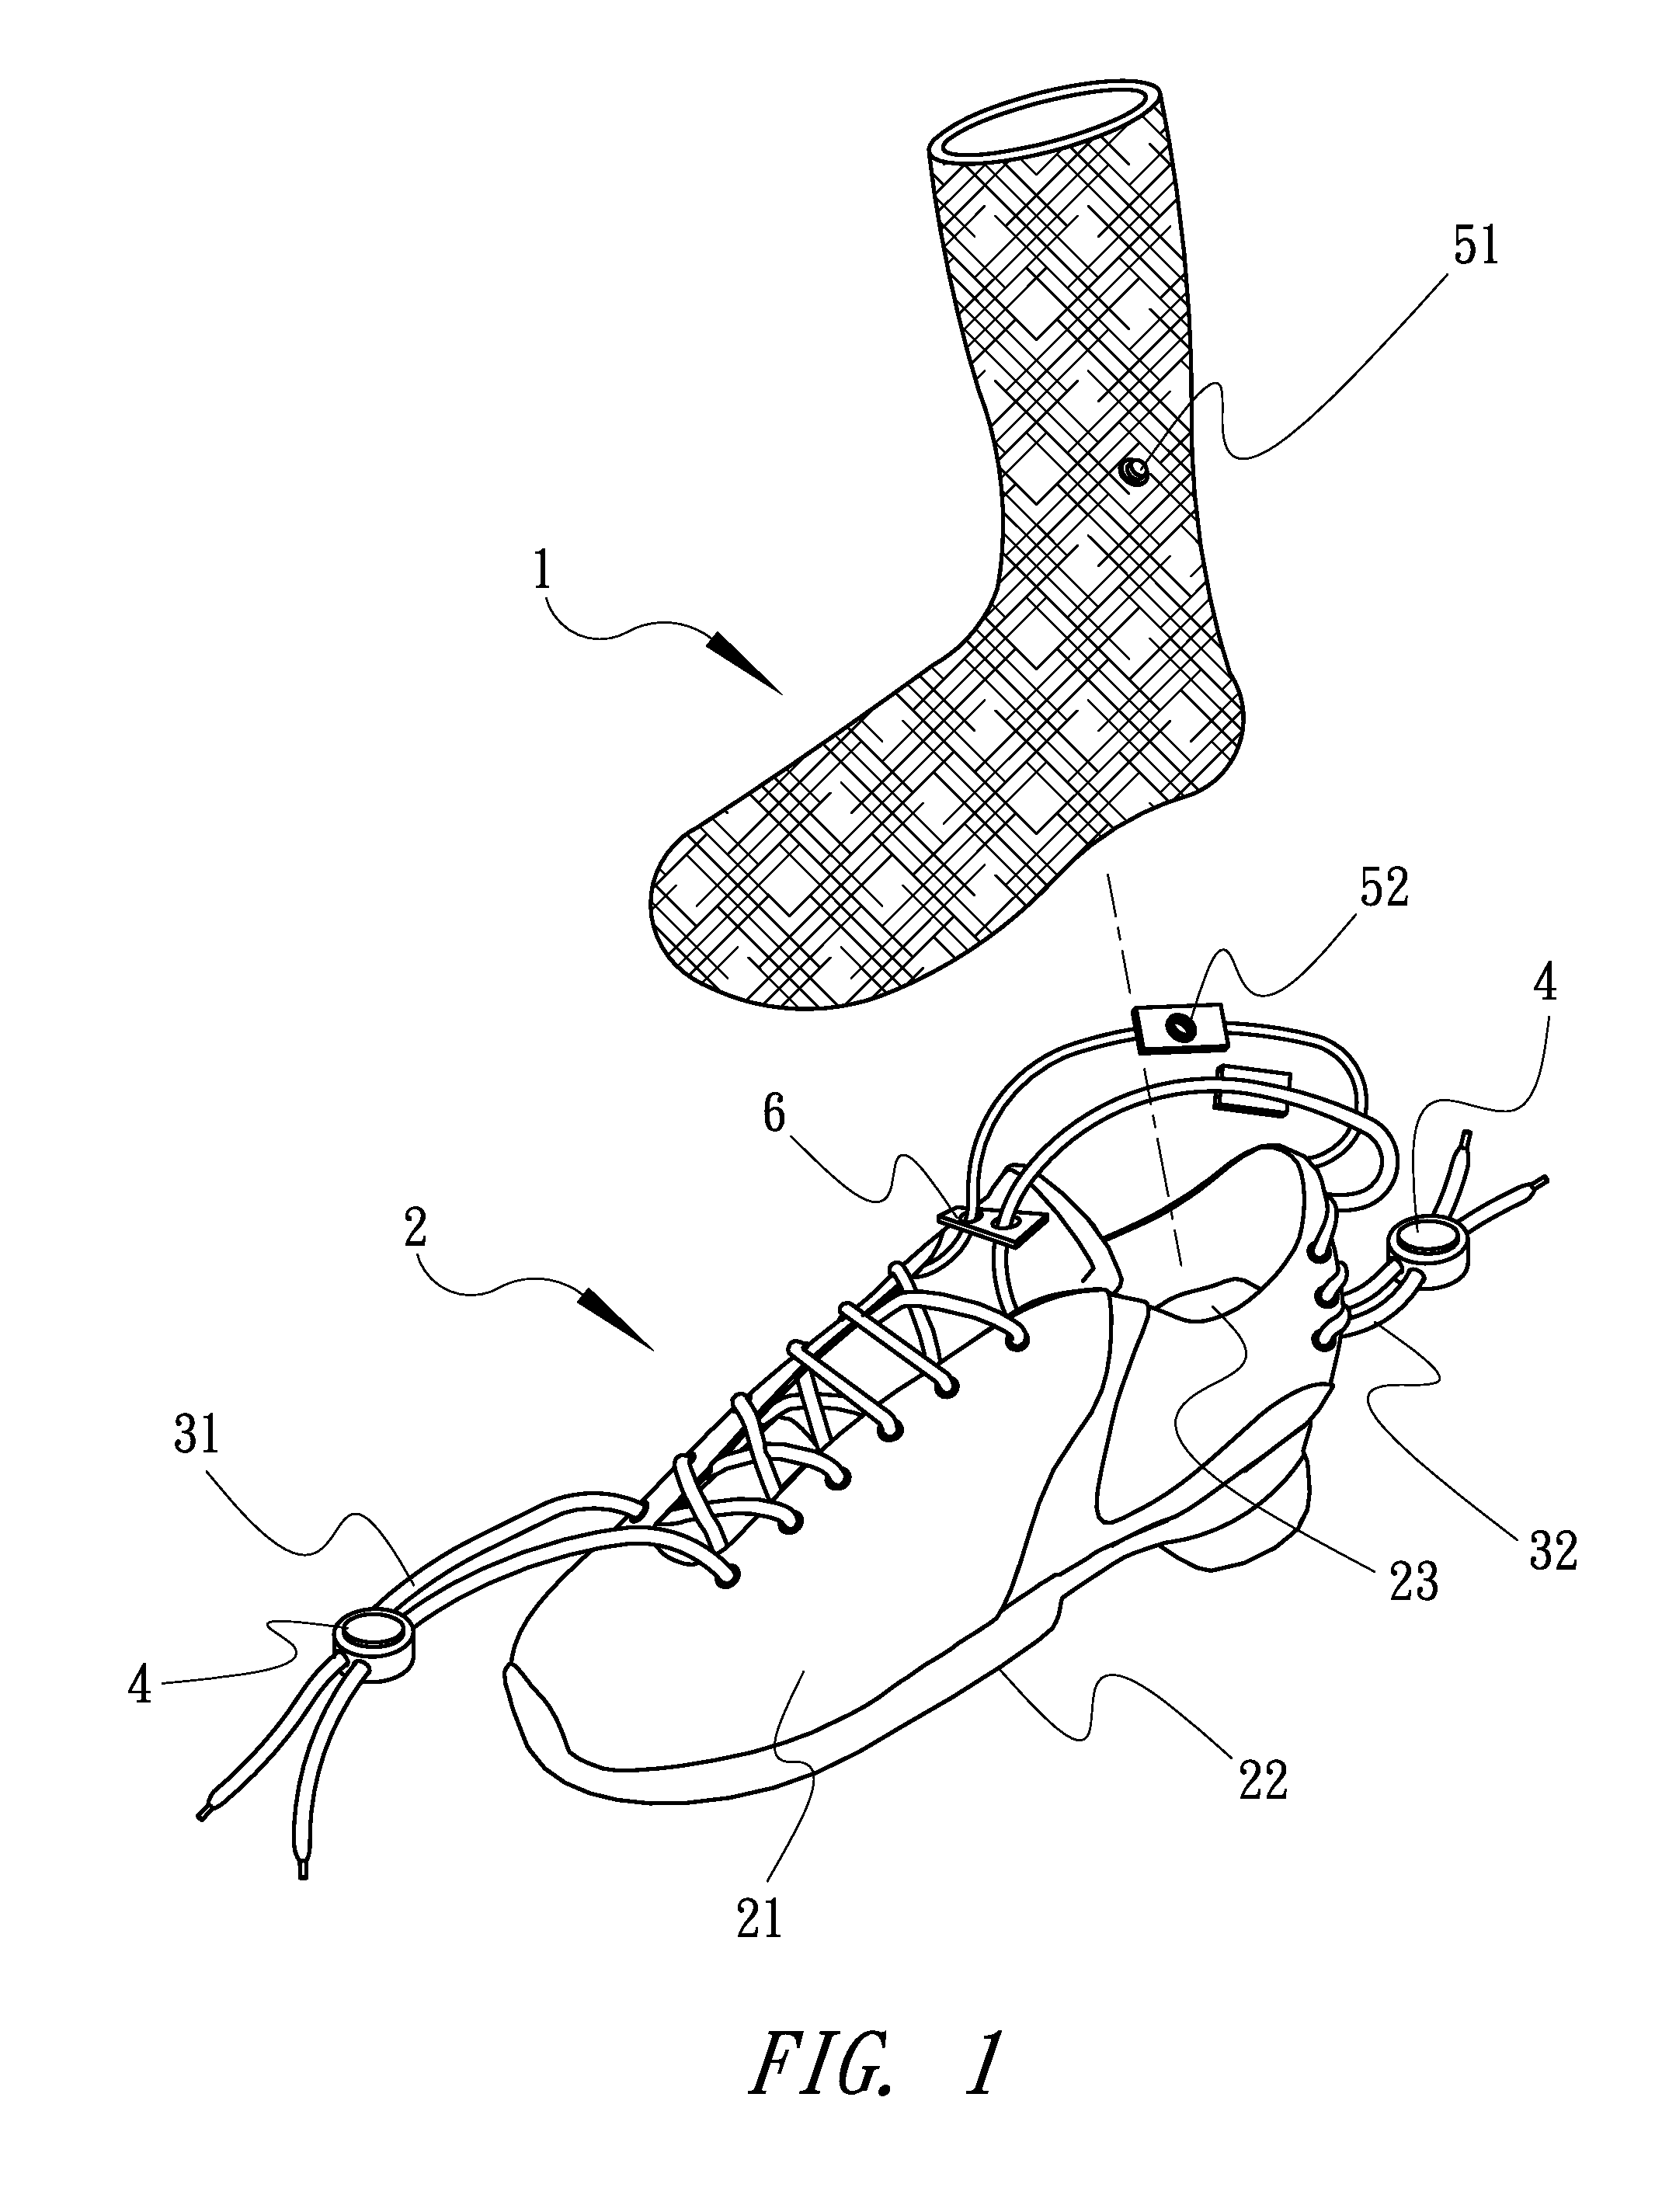 Shoes with socks which may have additional miniature stylish designs